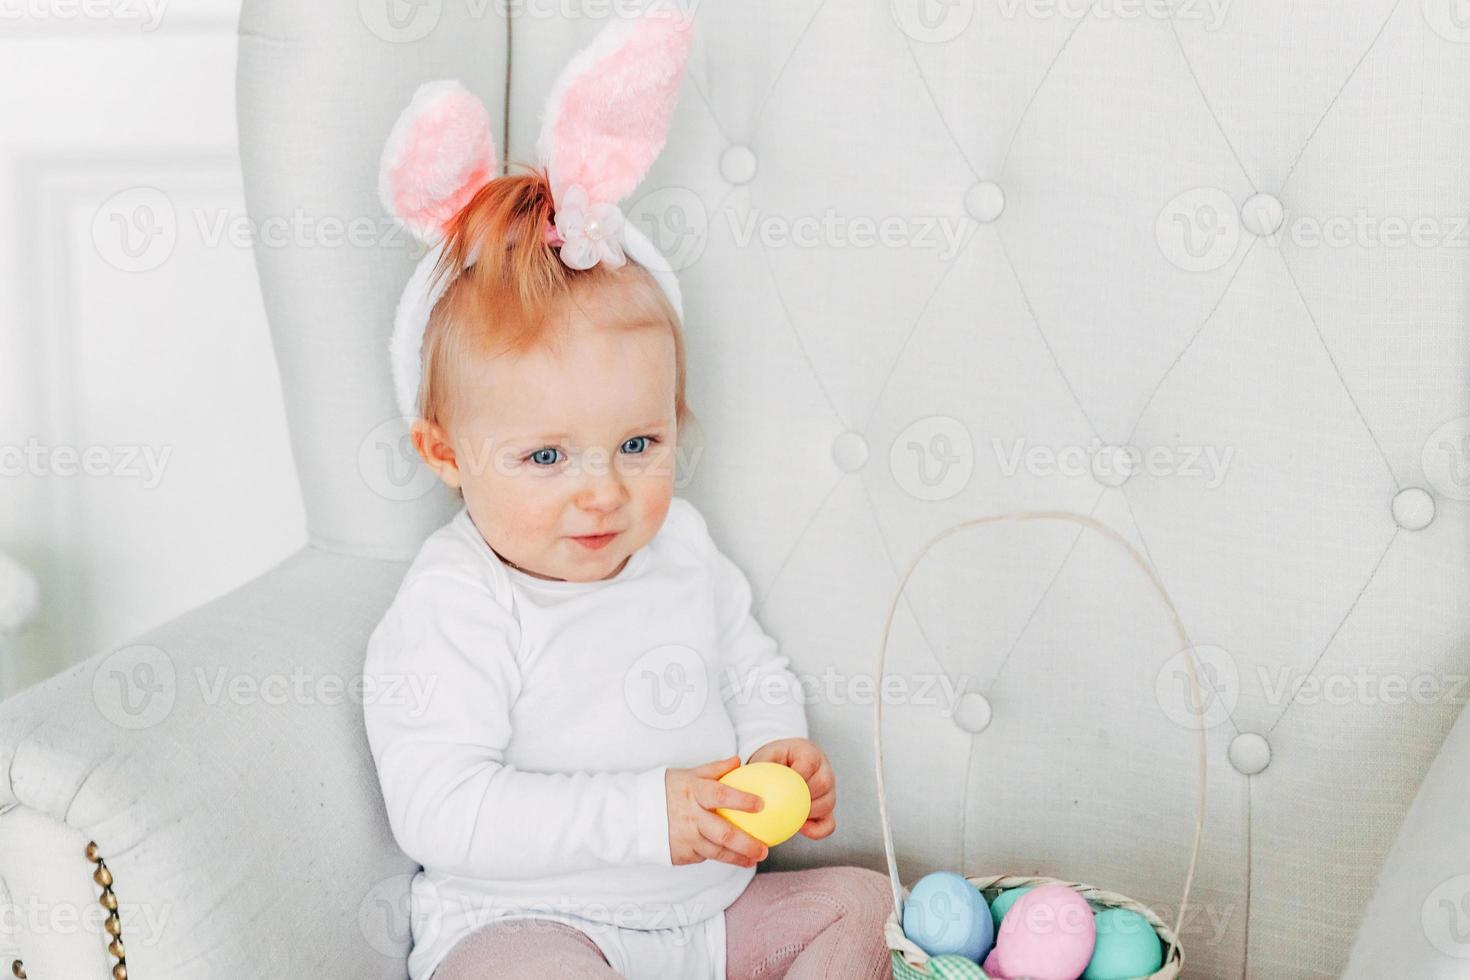 Little child girl wearing bunny ears on Easter day and playing with painted eggs photo